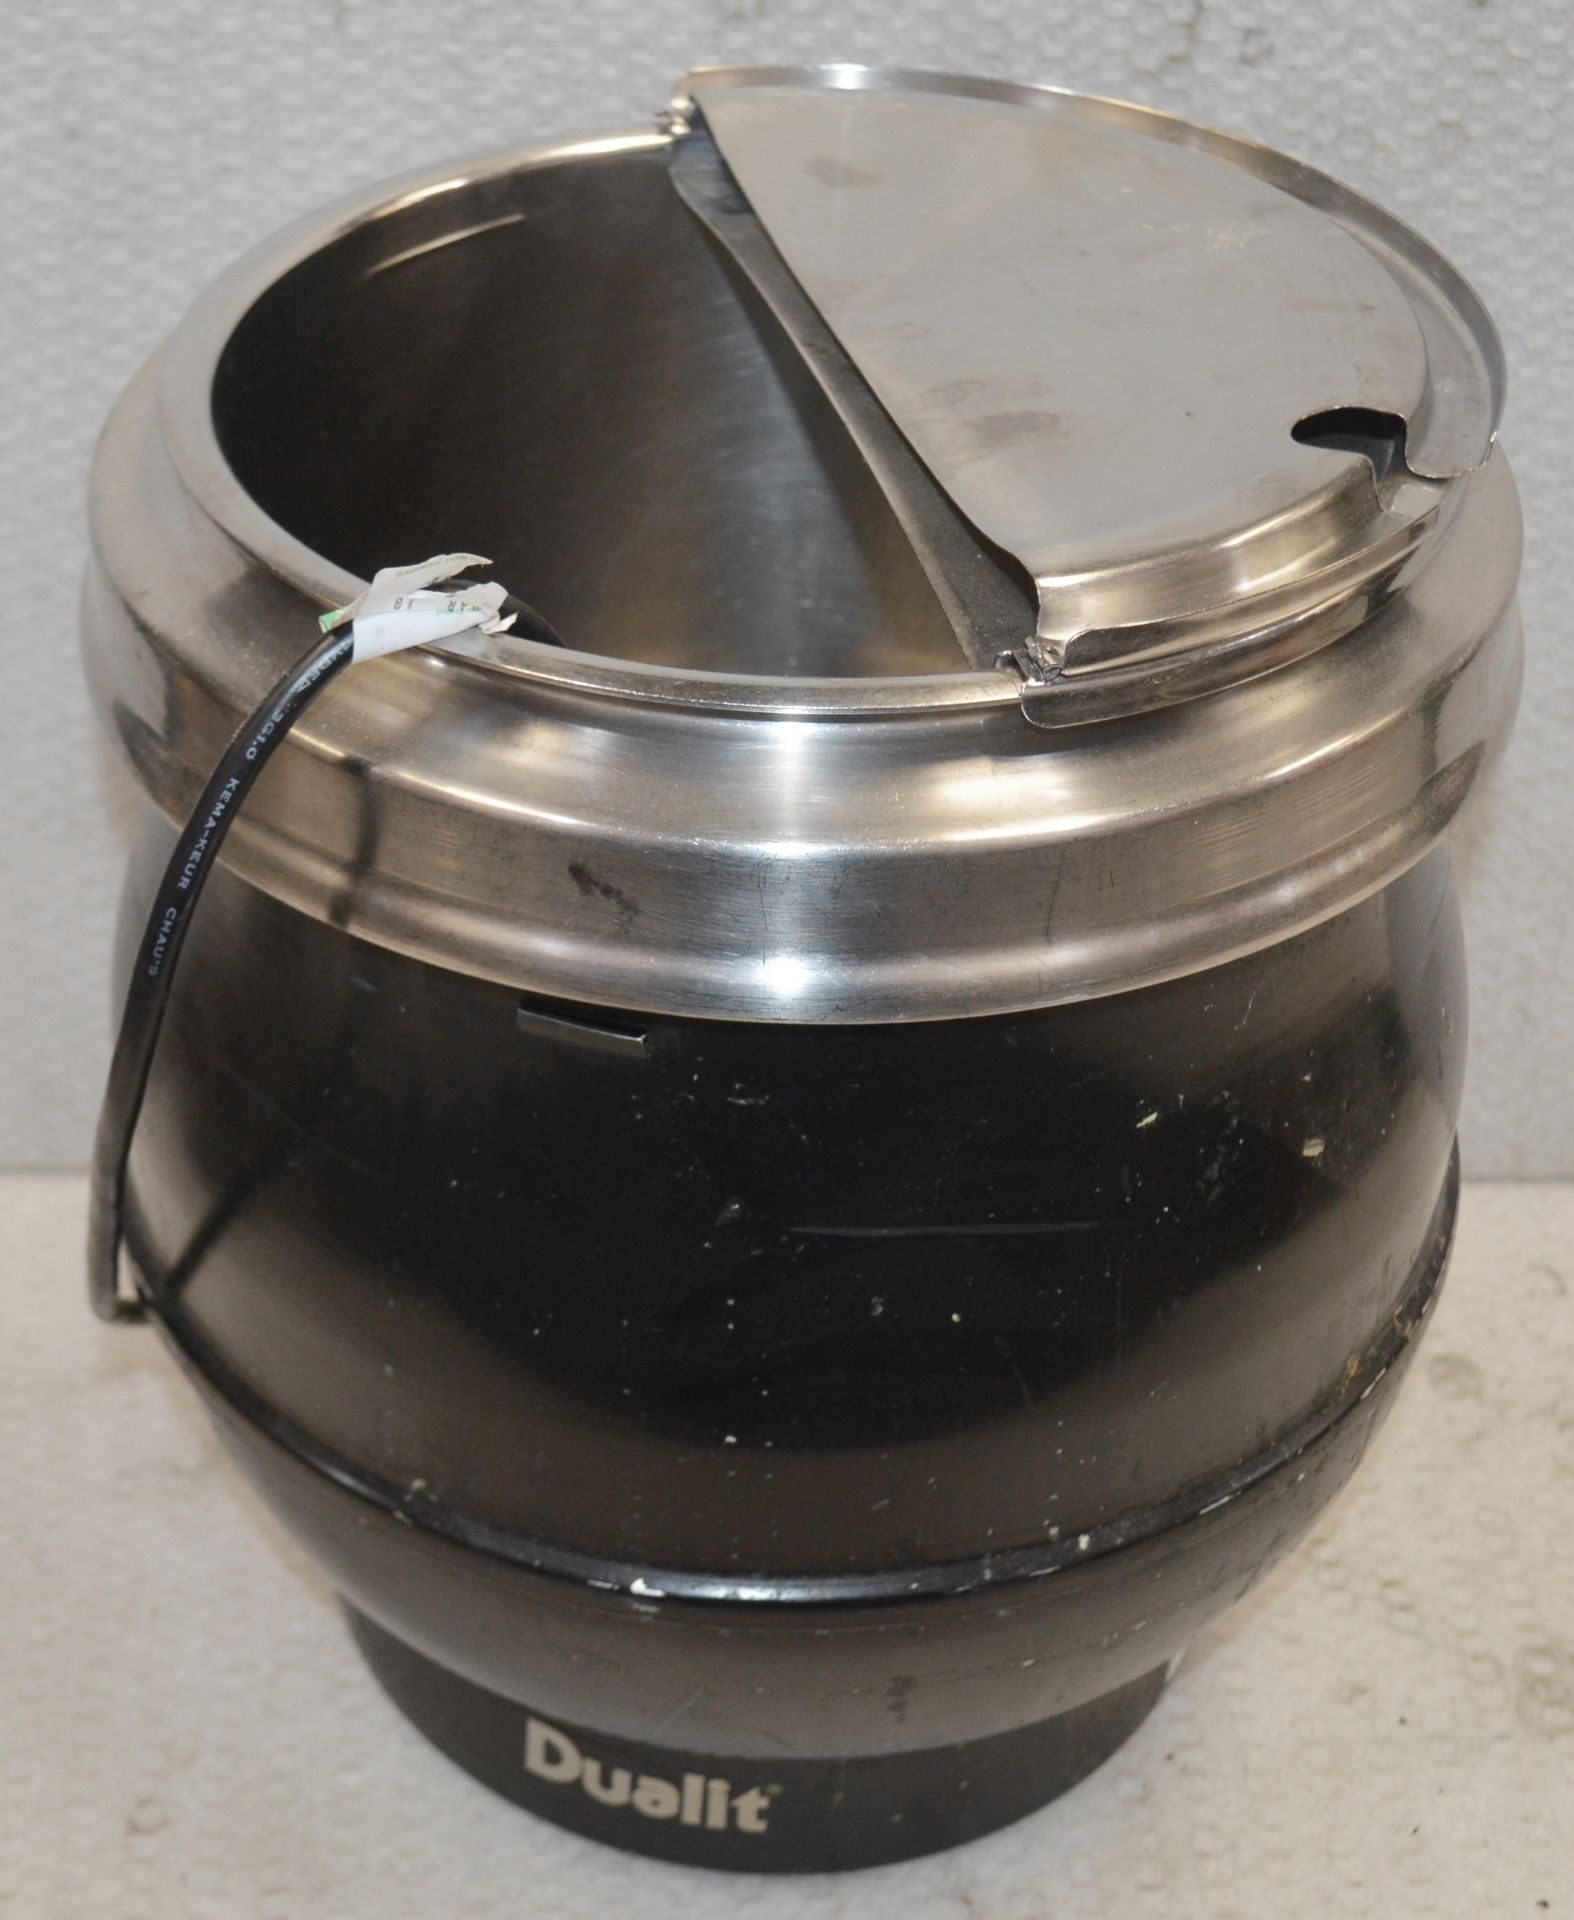 1 x Stainless Steel Dualit Hotpot/Soup Kettle - 11 litre capacity - Dimensions: H38 x W34 cm - - Image 2 of 5